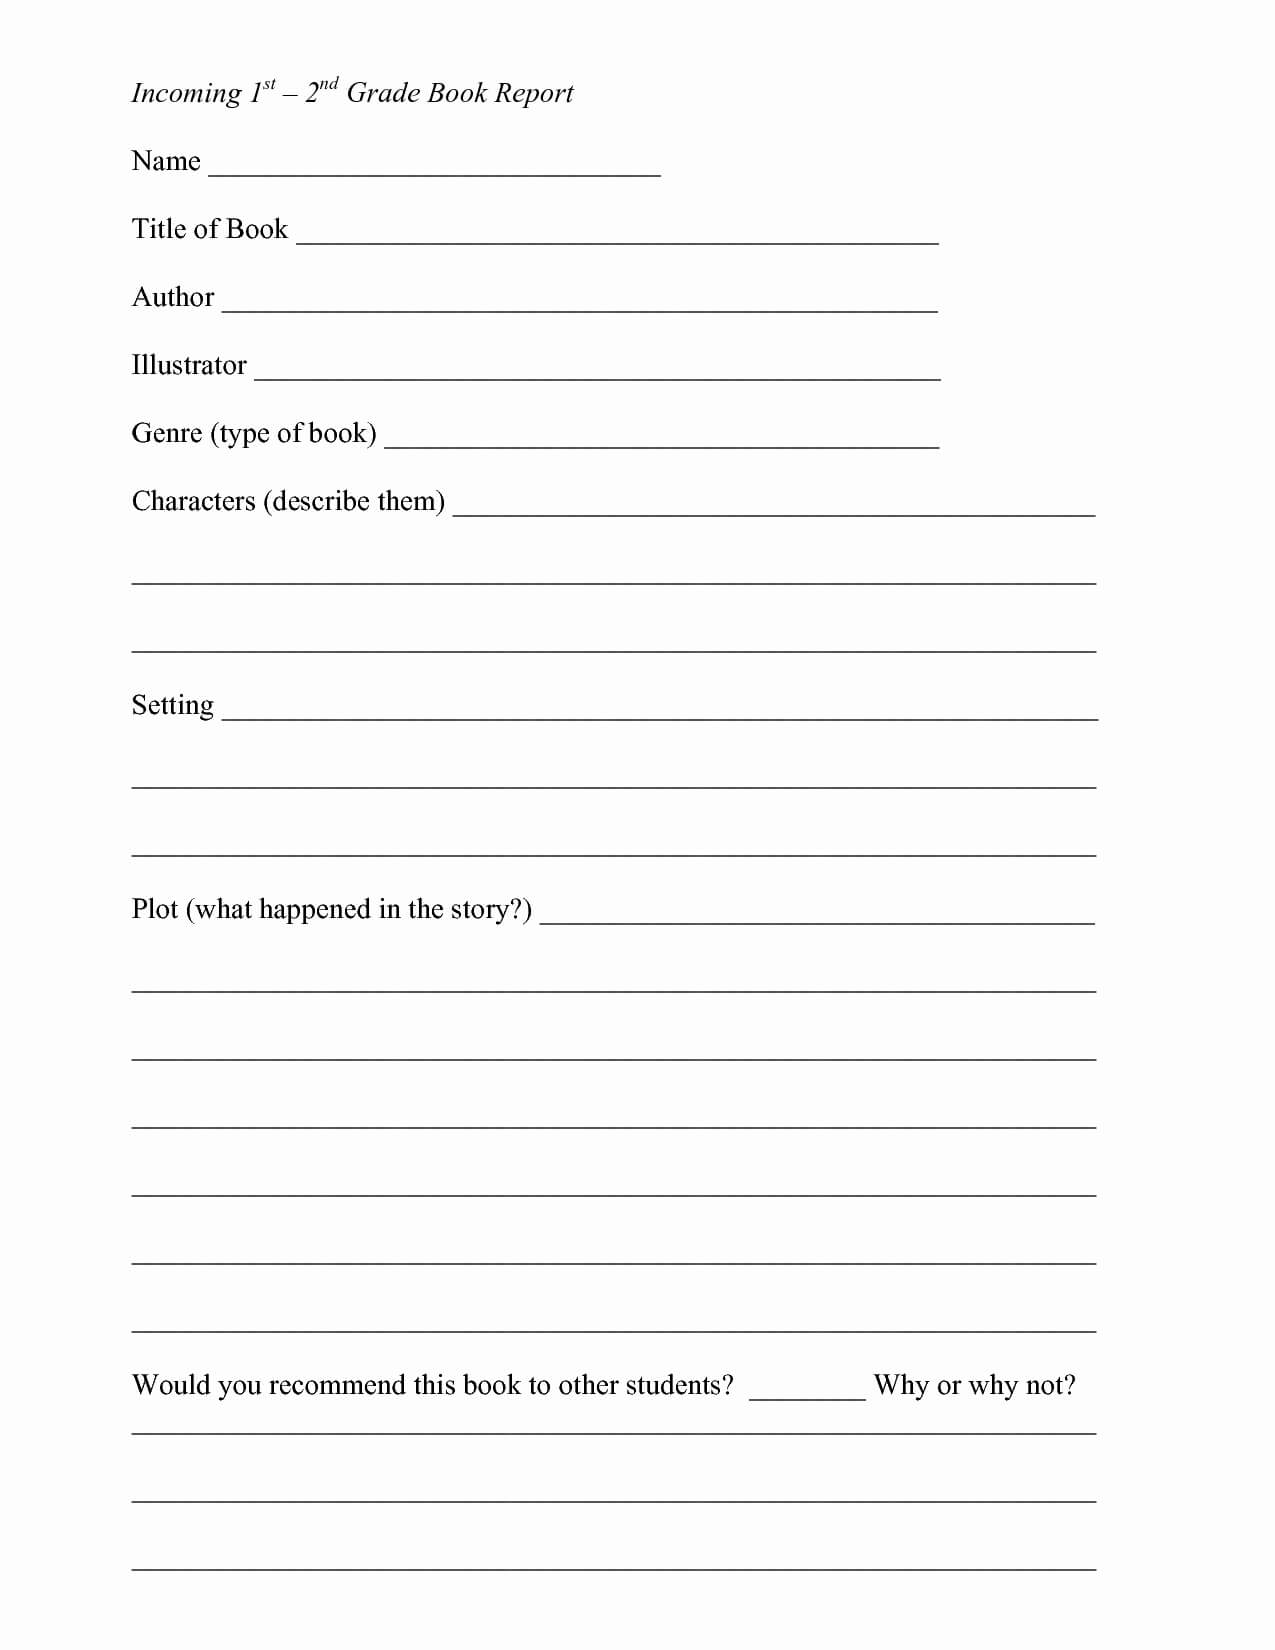 Book Report Template Write And Format A 3Rd Grade Form For Pertaining To Book Report Template High School